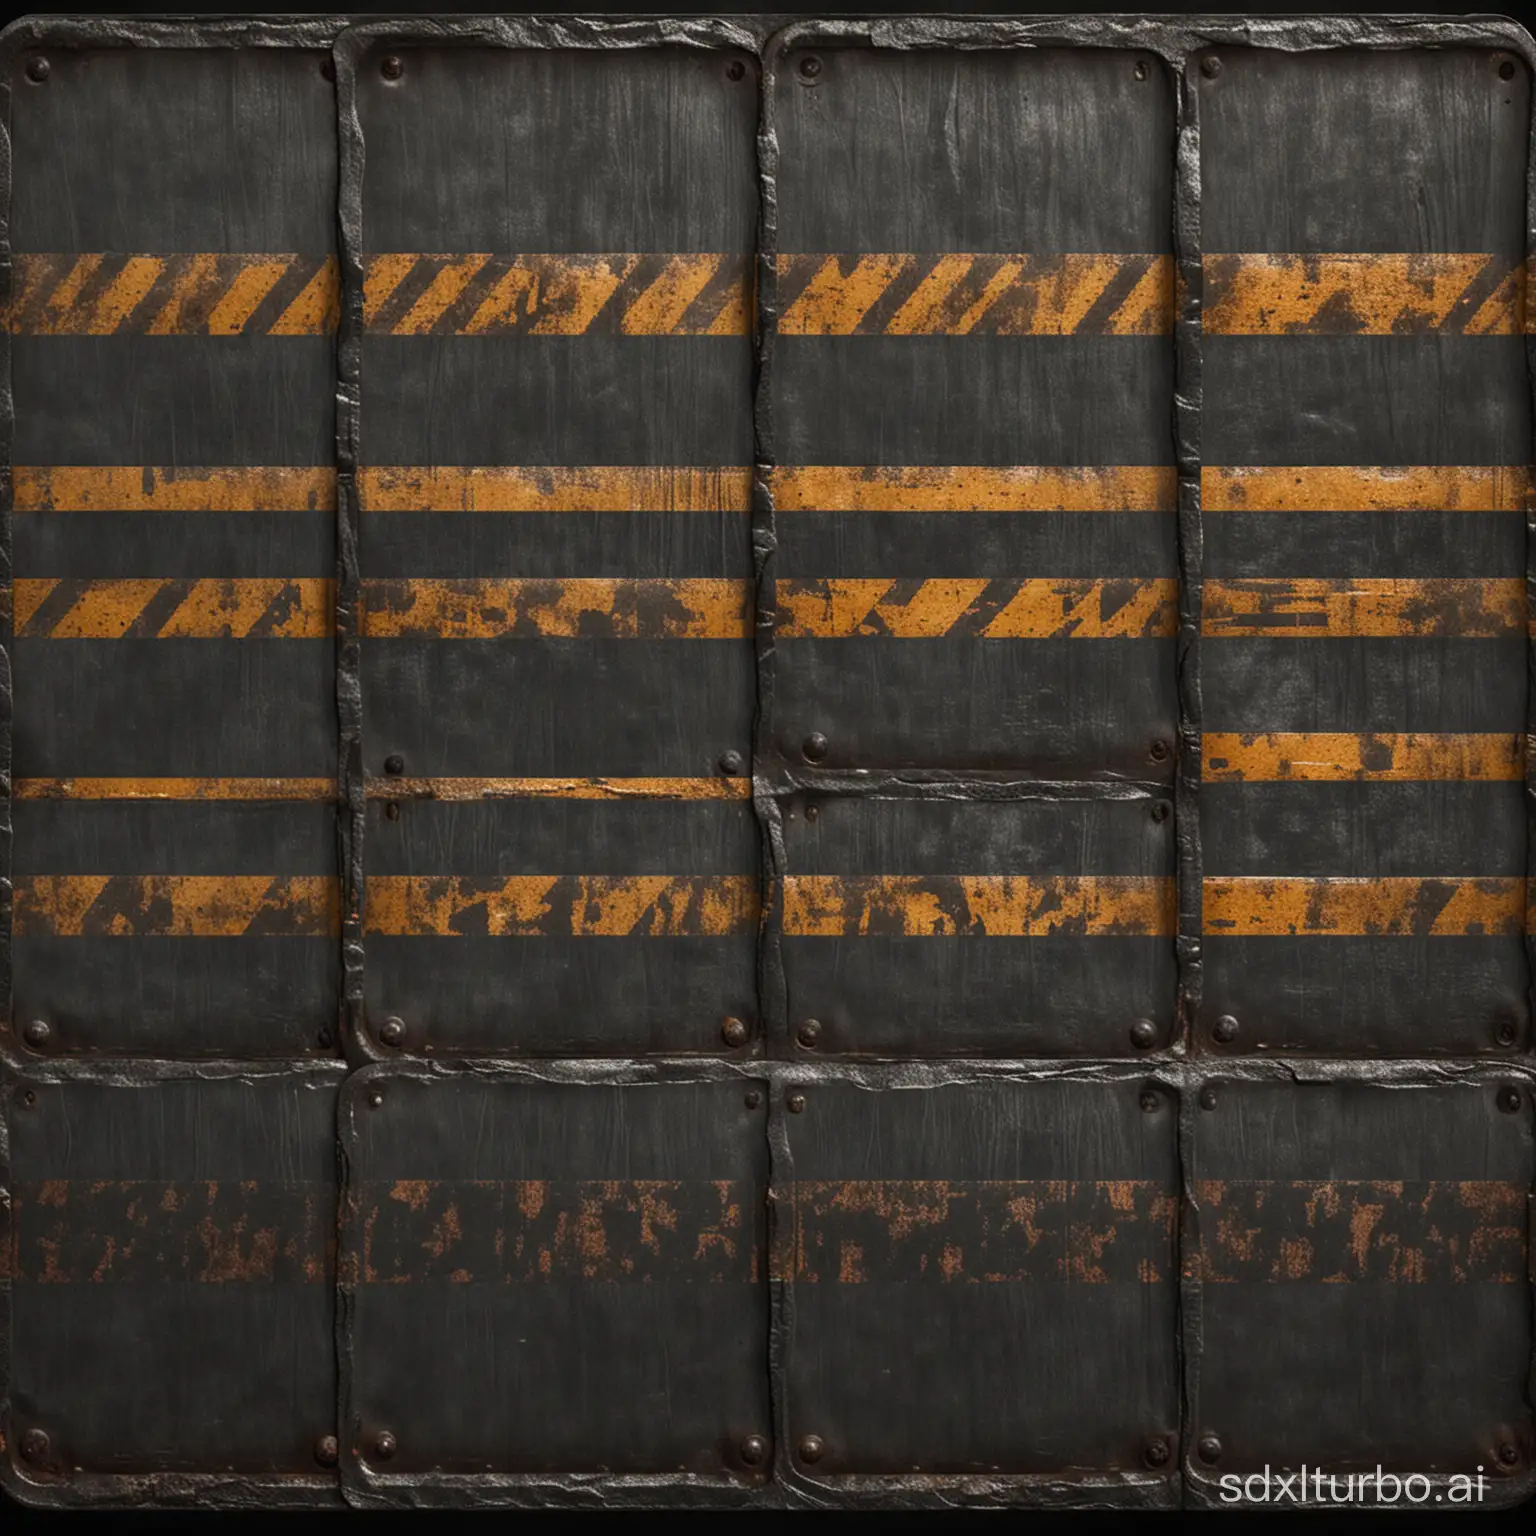 Industrial-Metal-Plates-with-Warning-Stripes-Texture-Assets